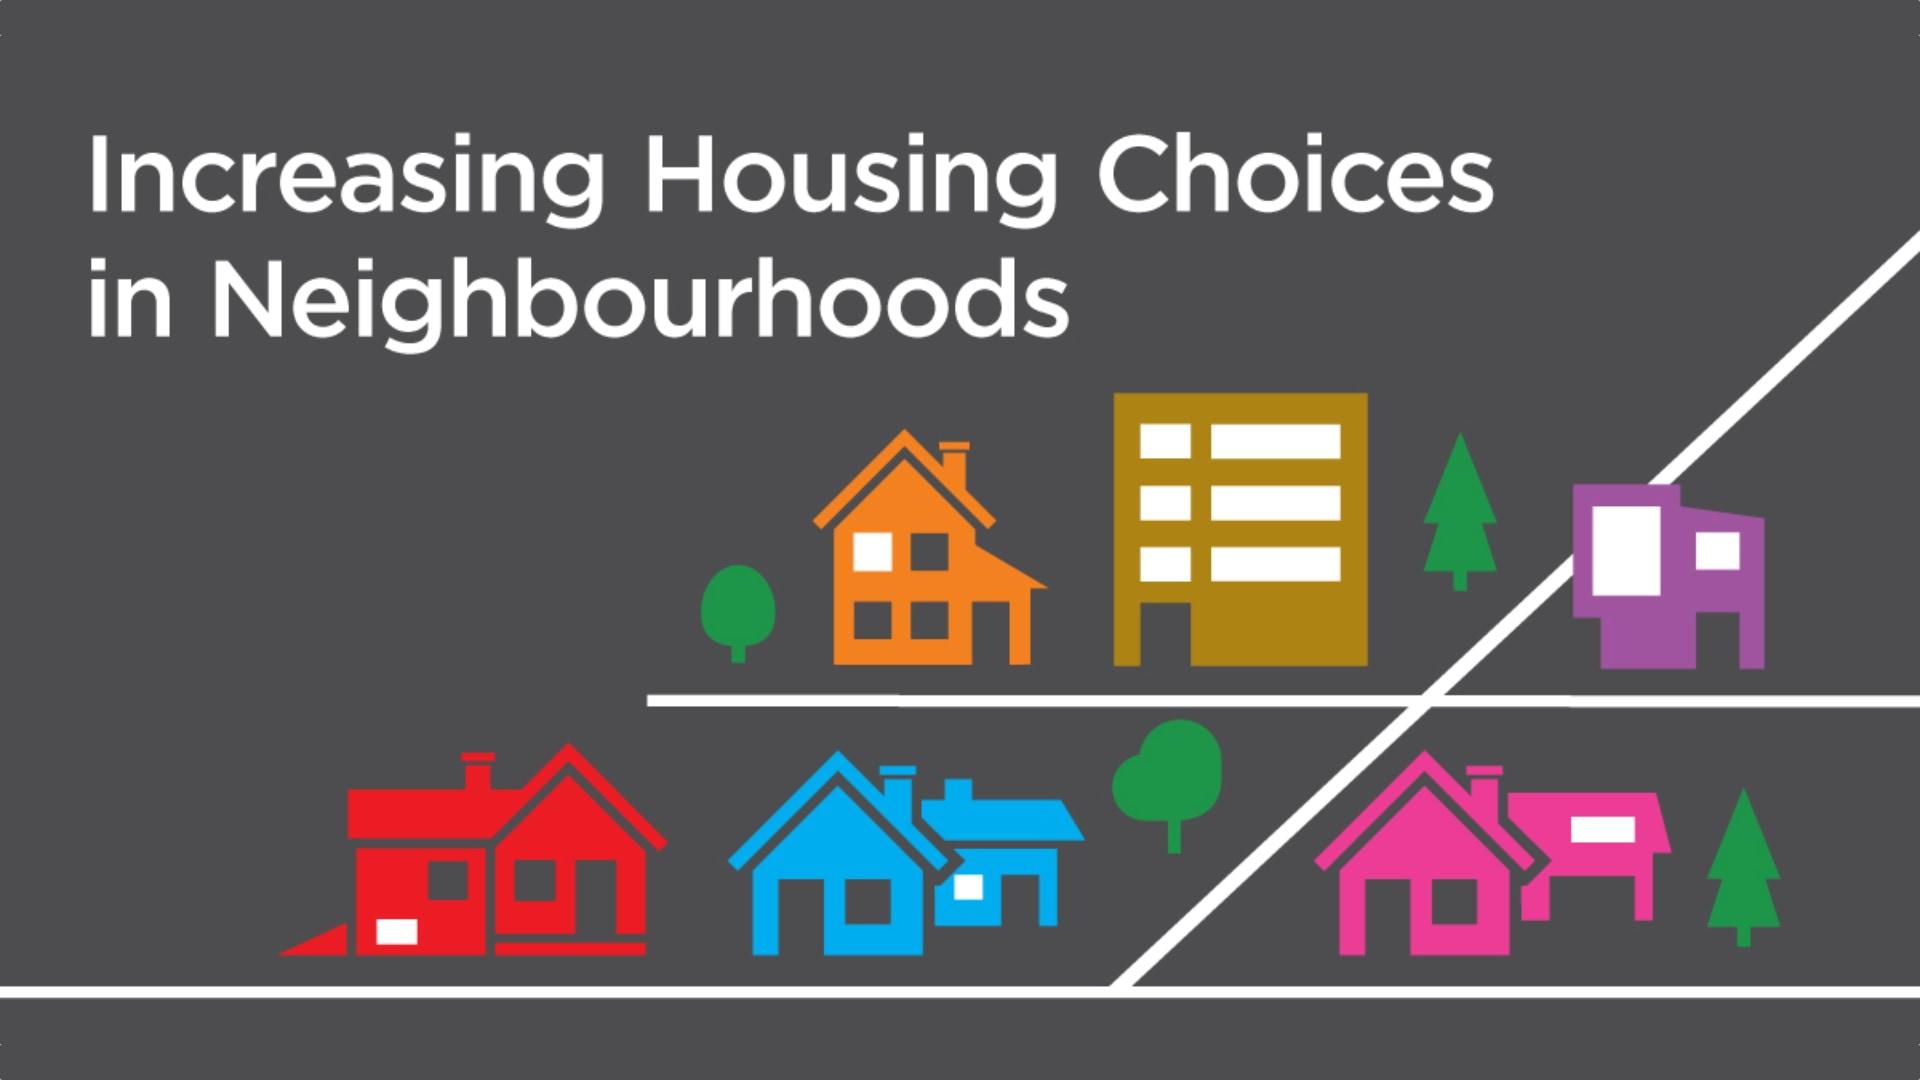 City to hold public meetings on ways to increase housing choices in neighbourhoods